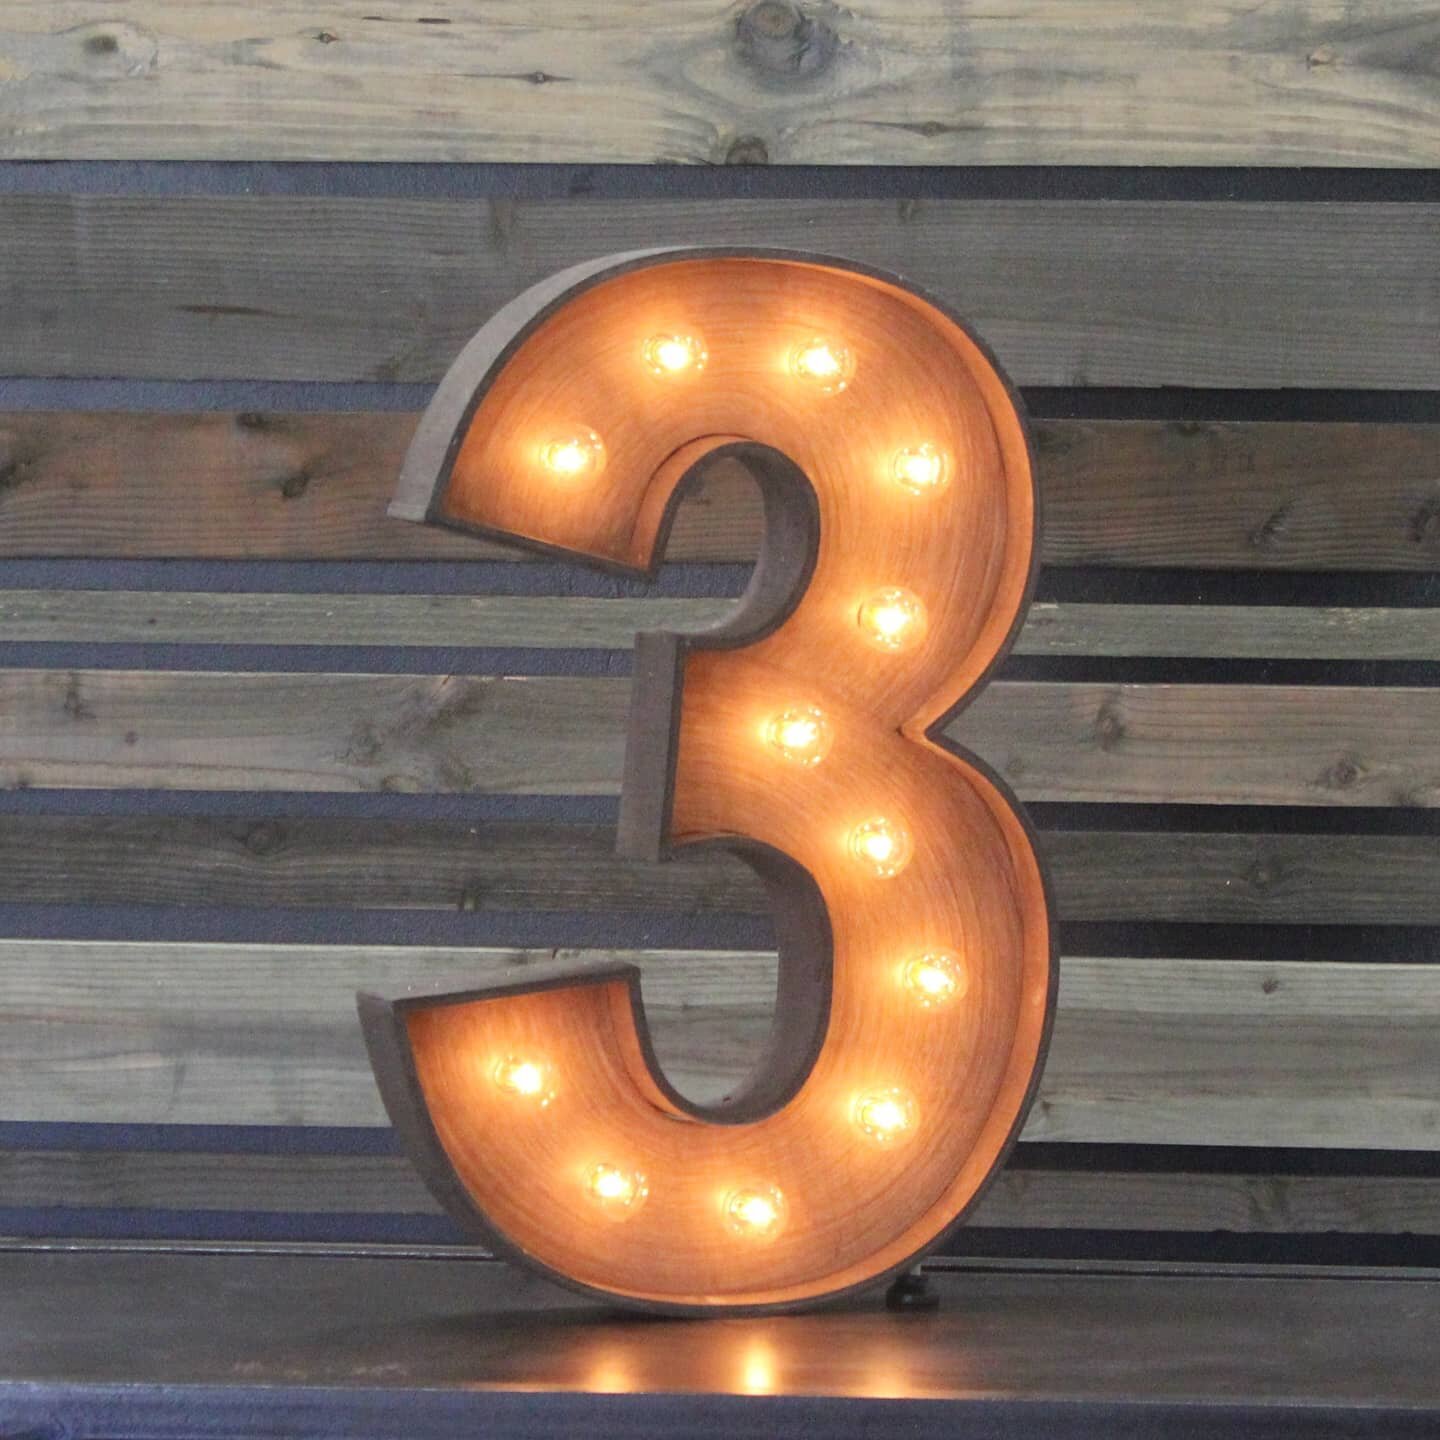 3 is the magic number when you are making decisions for the venue and professionals you will book for your wedding or special event. 

Visit 3 venues... Meet with 3 photographers... 3 DJs... 3 florists... etc. 

Any more than 3 at a time becomes over